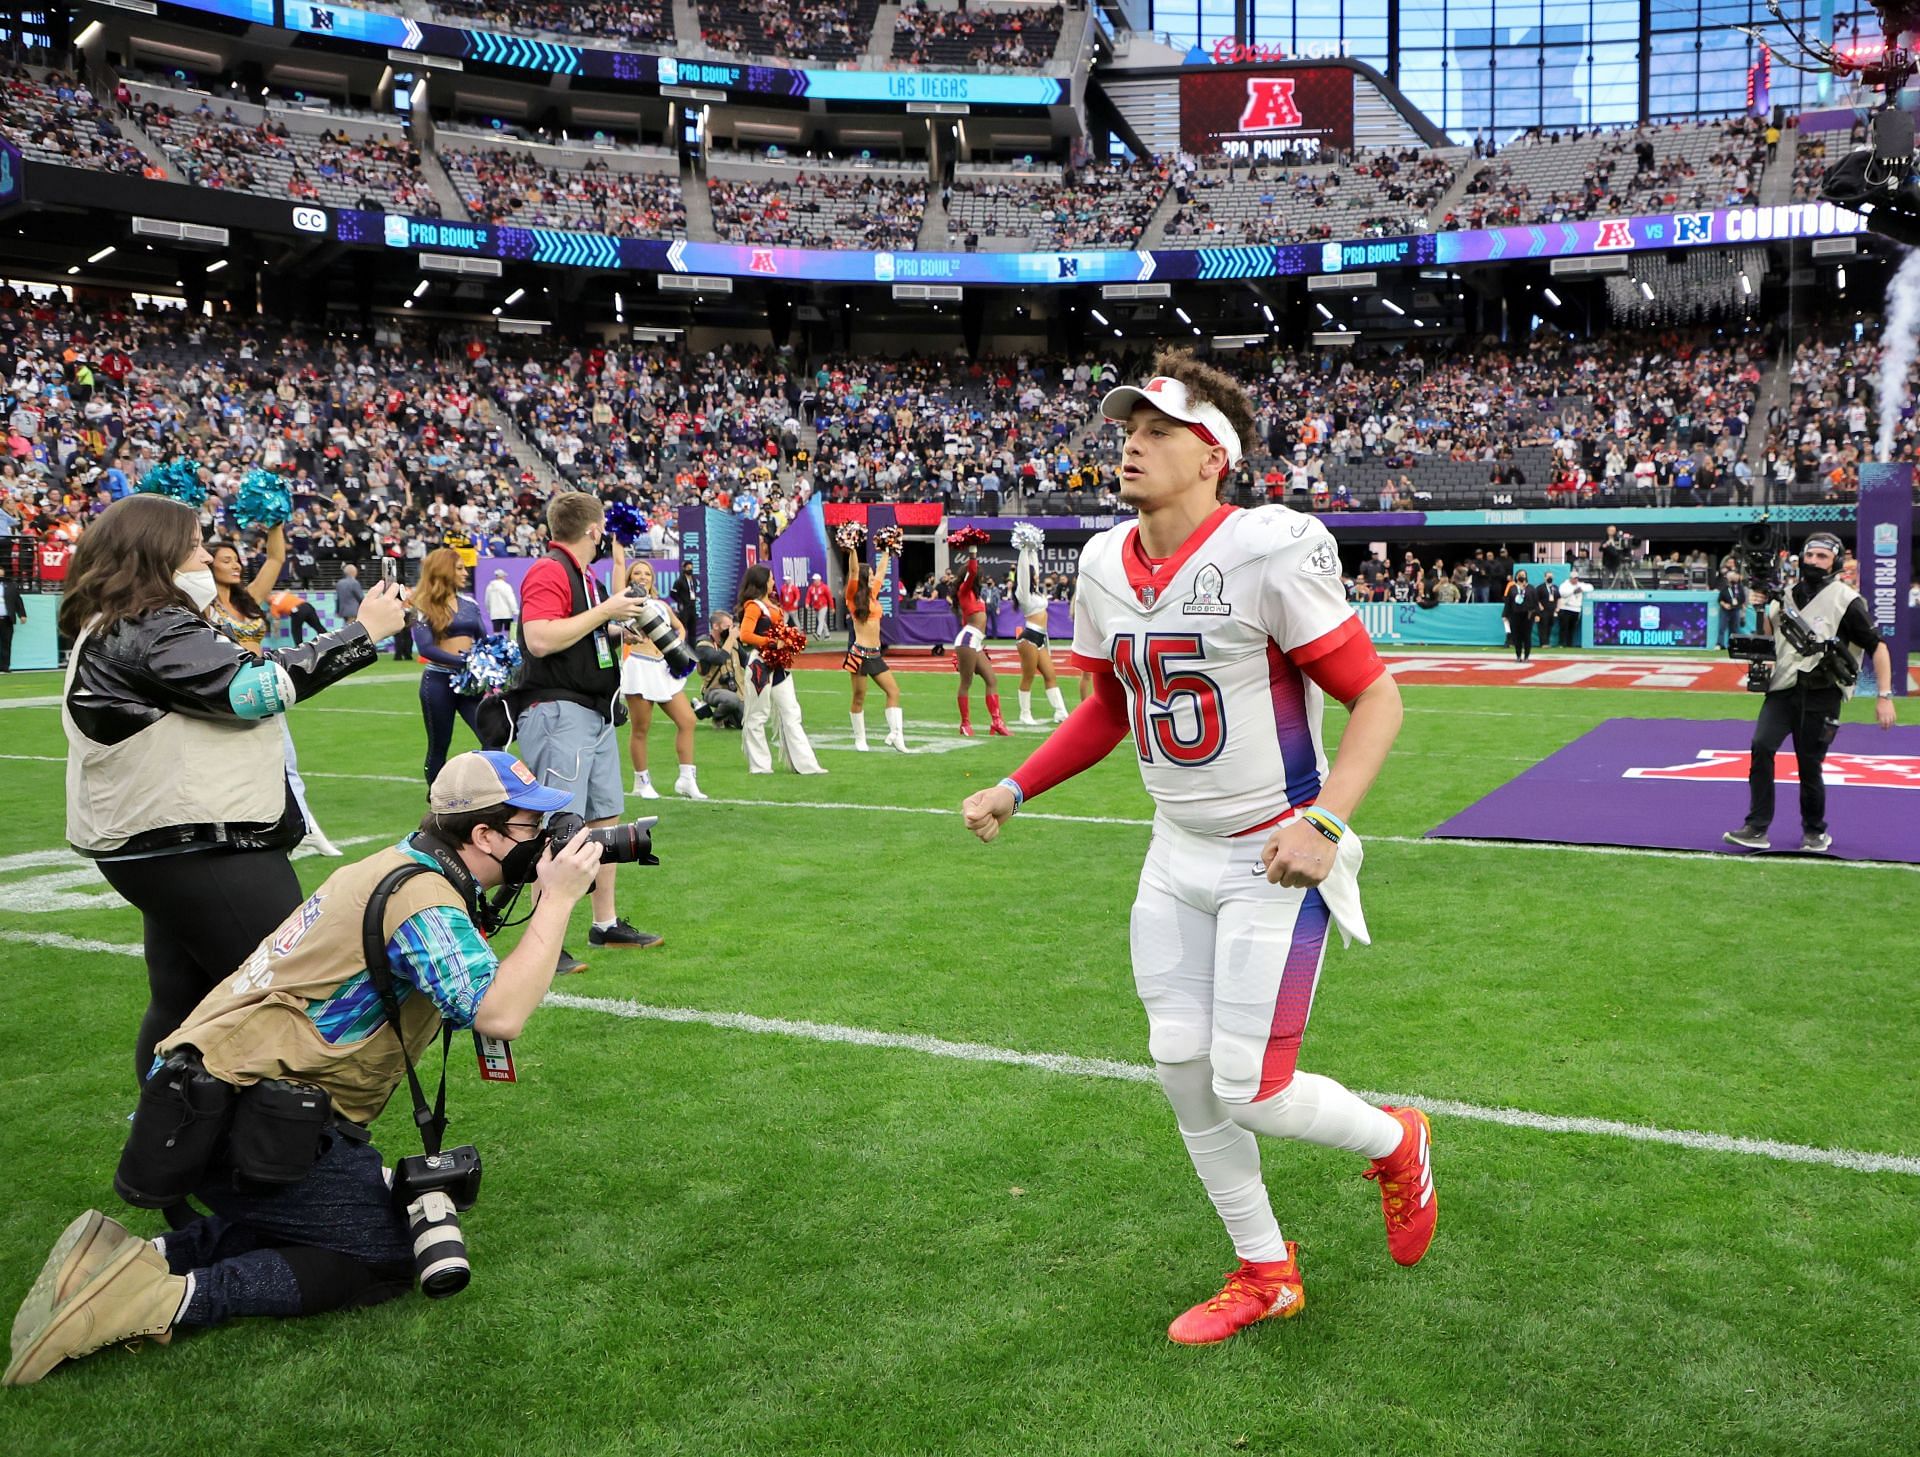 Patrick Mahomes can ascend to a new level of stardom by succeeding